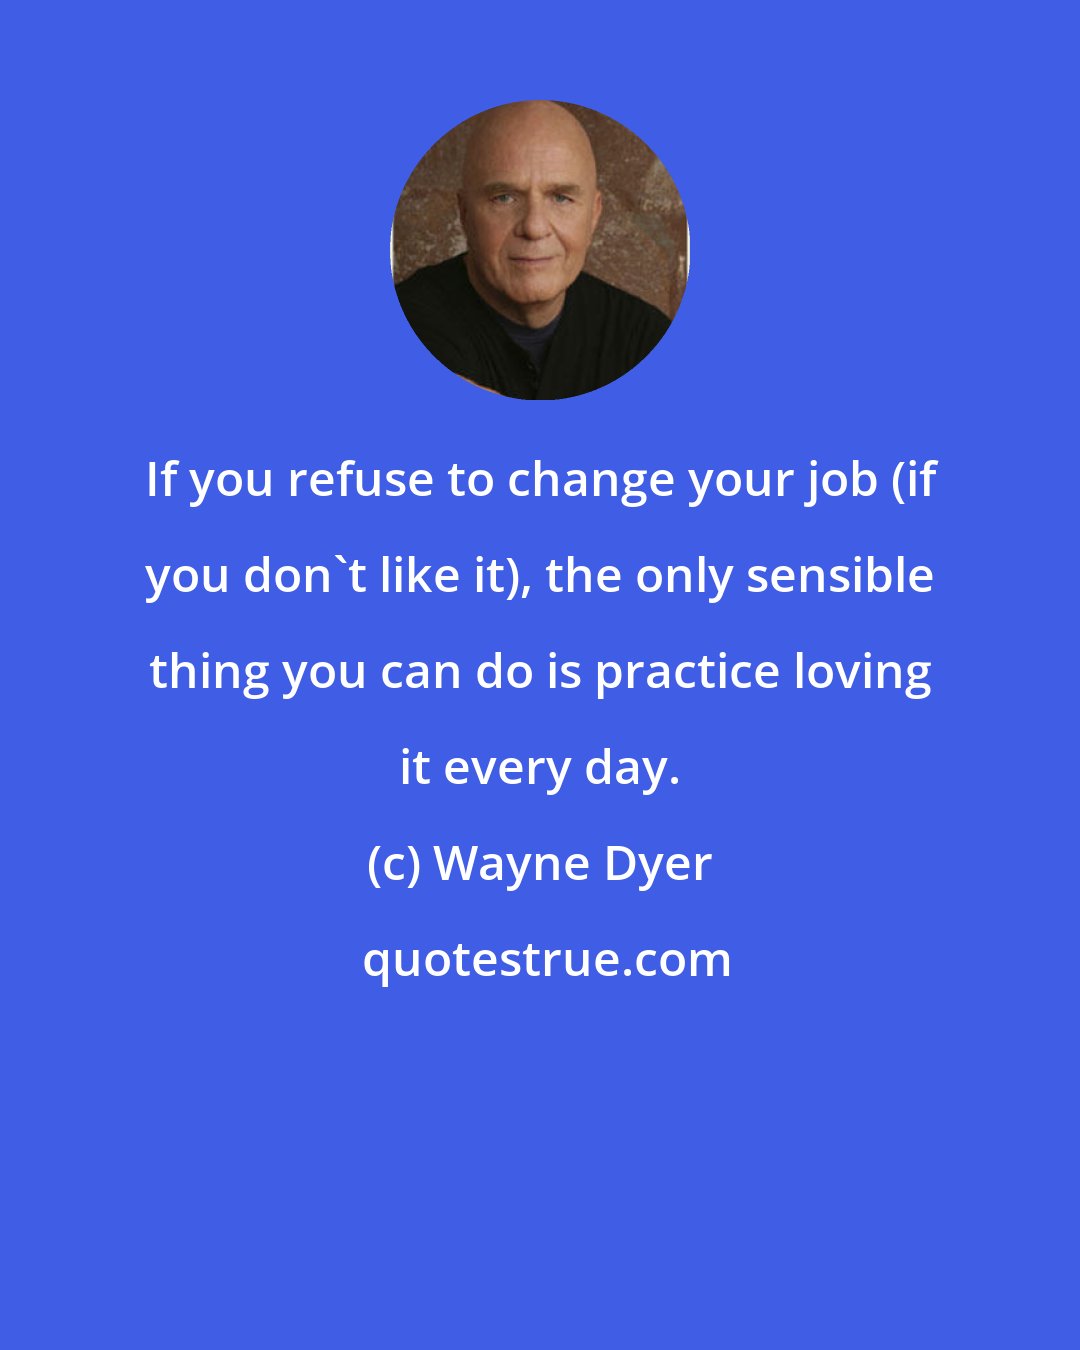 Wayne Dyer: If you refuse to change your job (if you don't like it), the only sensible thing you can do is practice loving it every day.